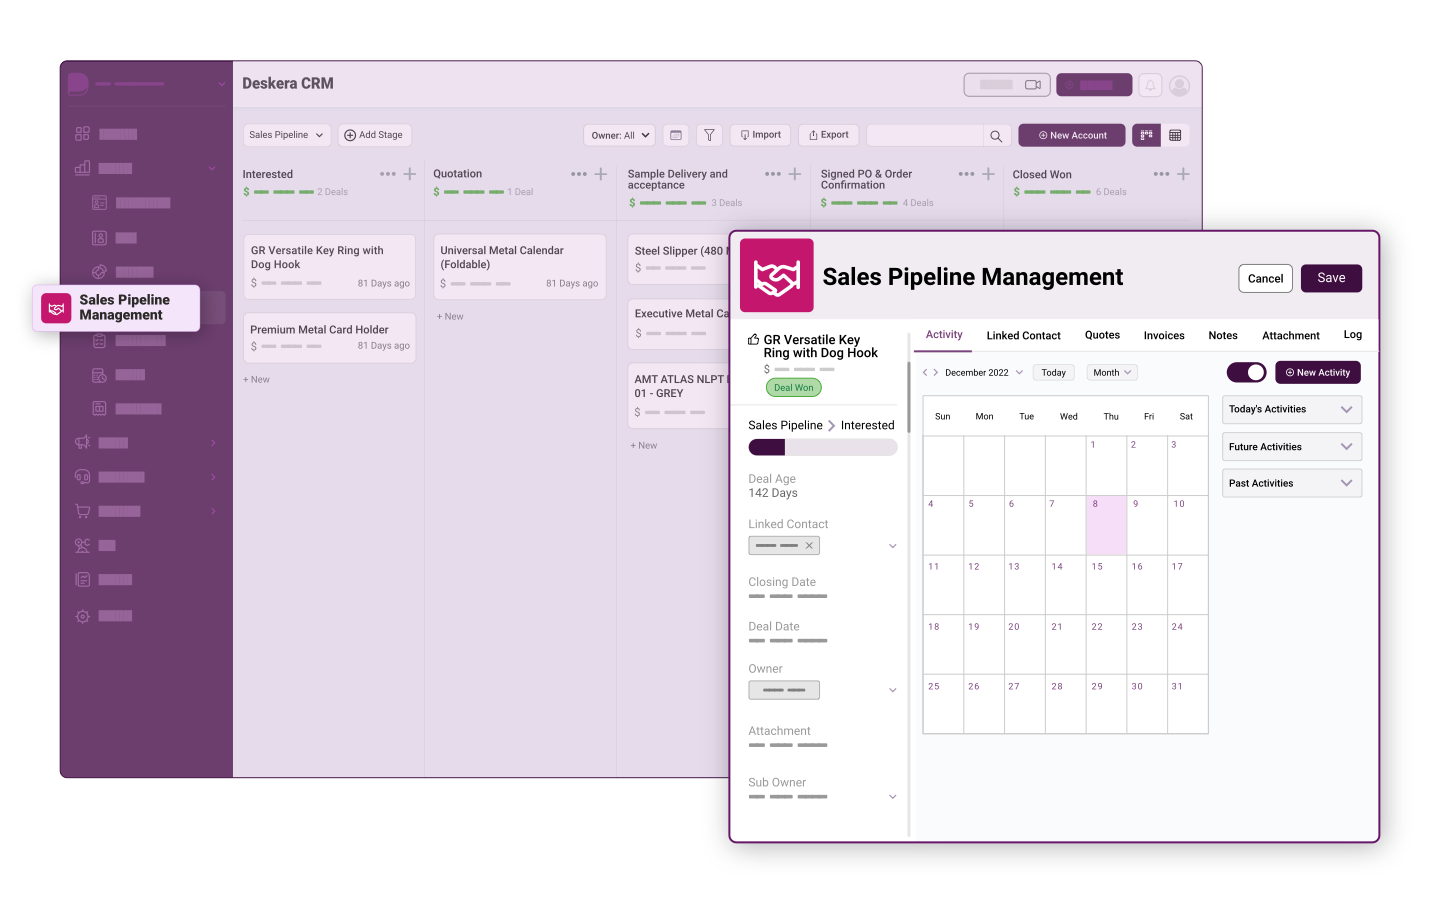 Track leads and prospects, monitor opportunities, and manage customer relationships. Easily customize pipeline stages to fit specific business needs. Monitor performance with insightful analytics for improved results.